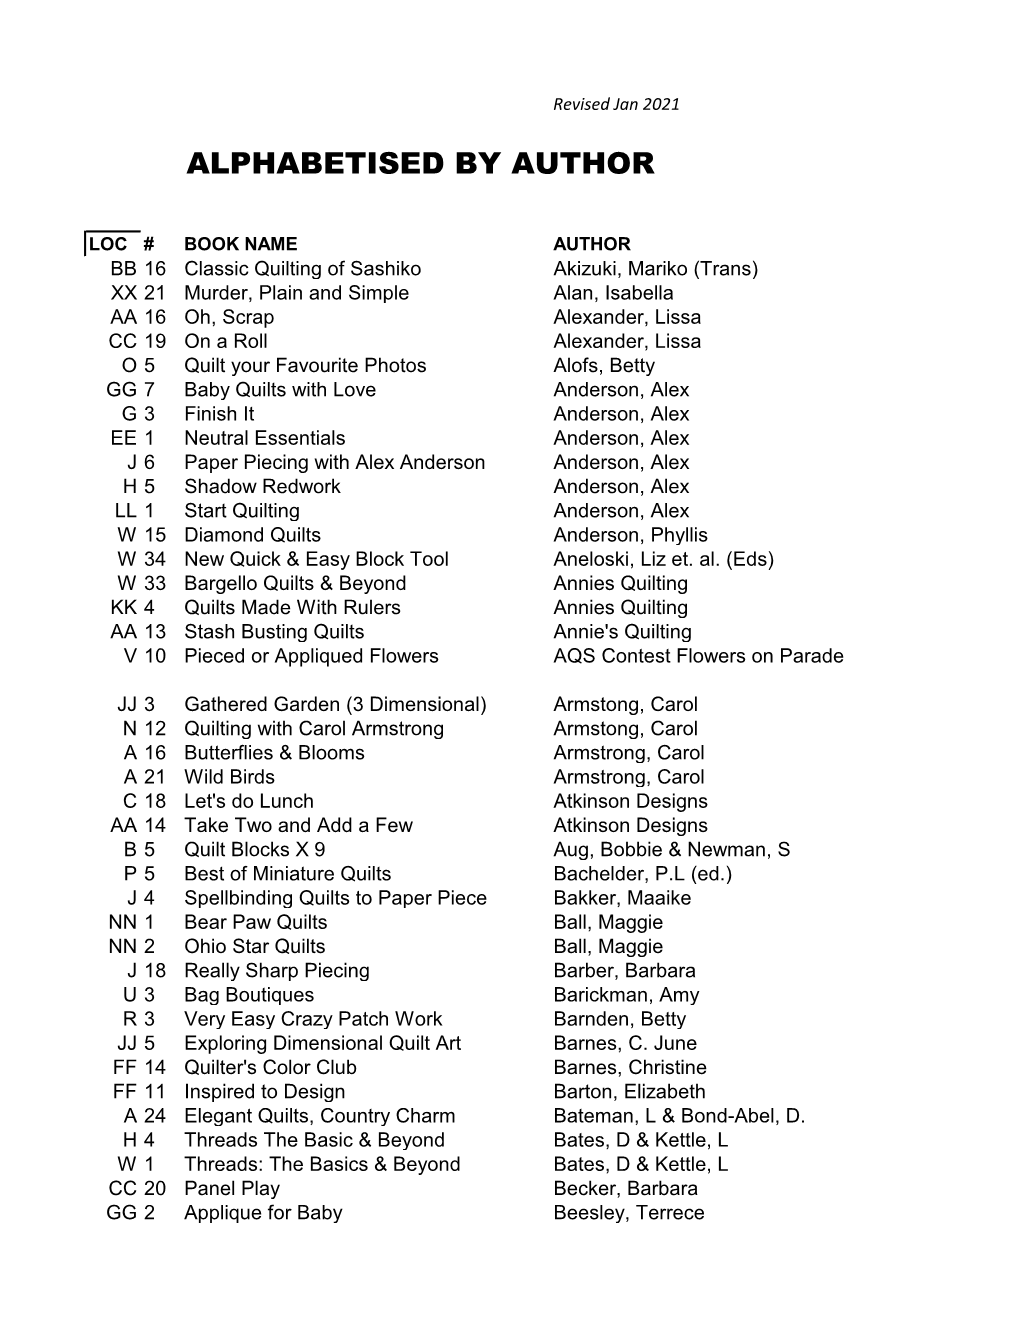 Alphabetised-By-Author-21.1